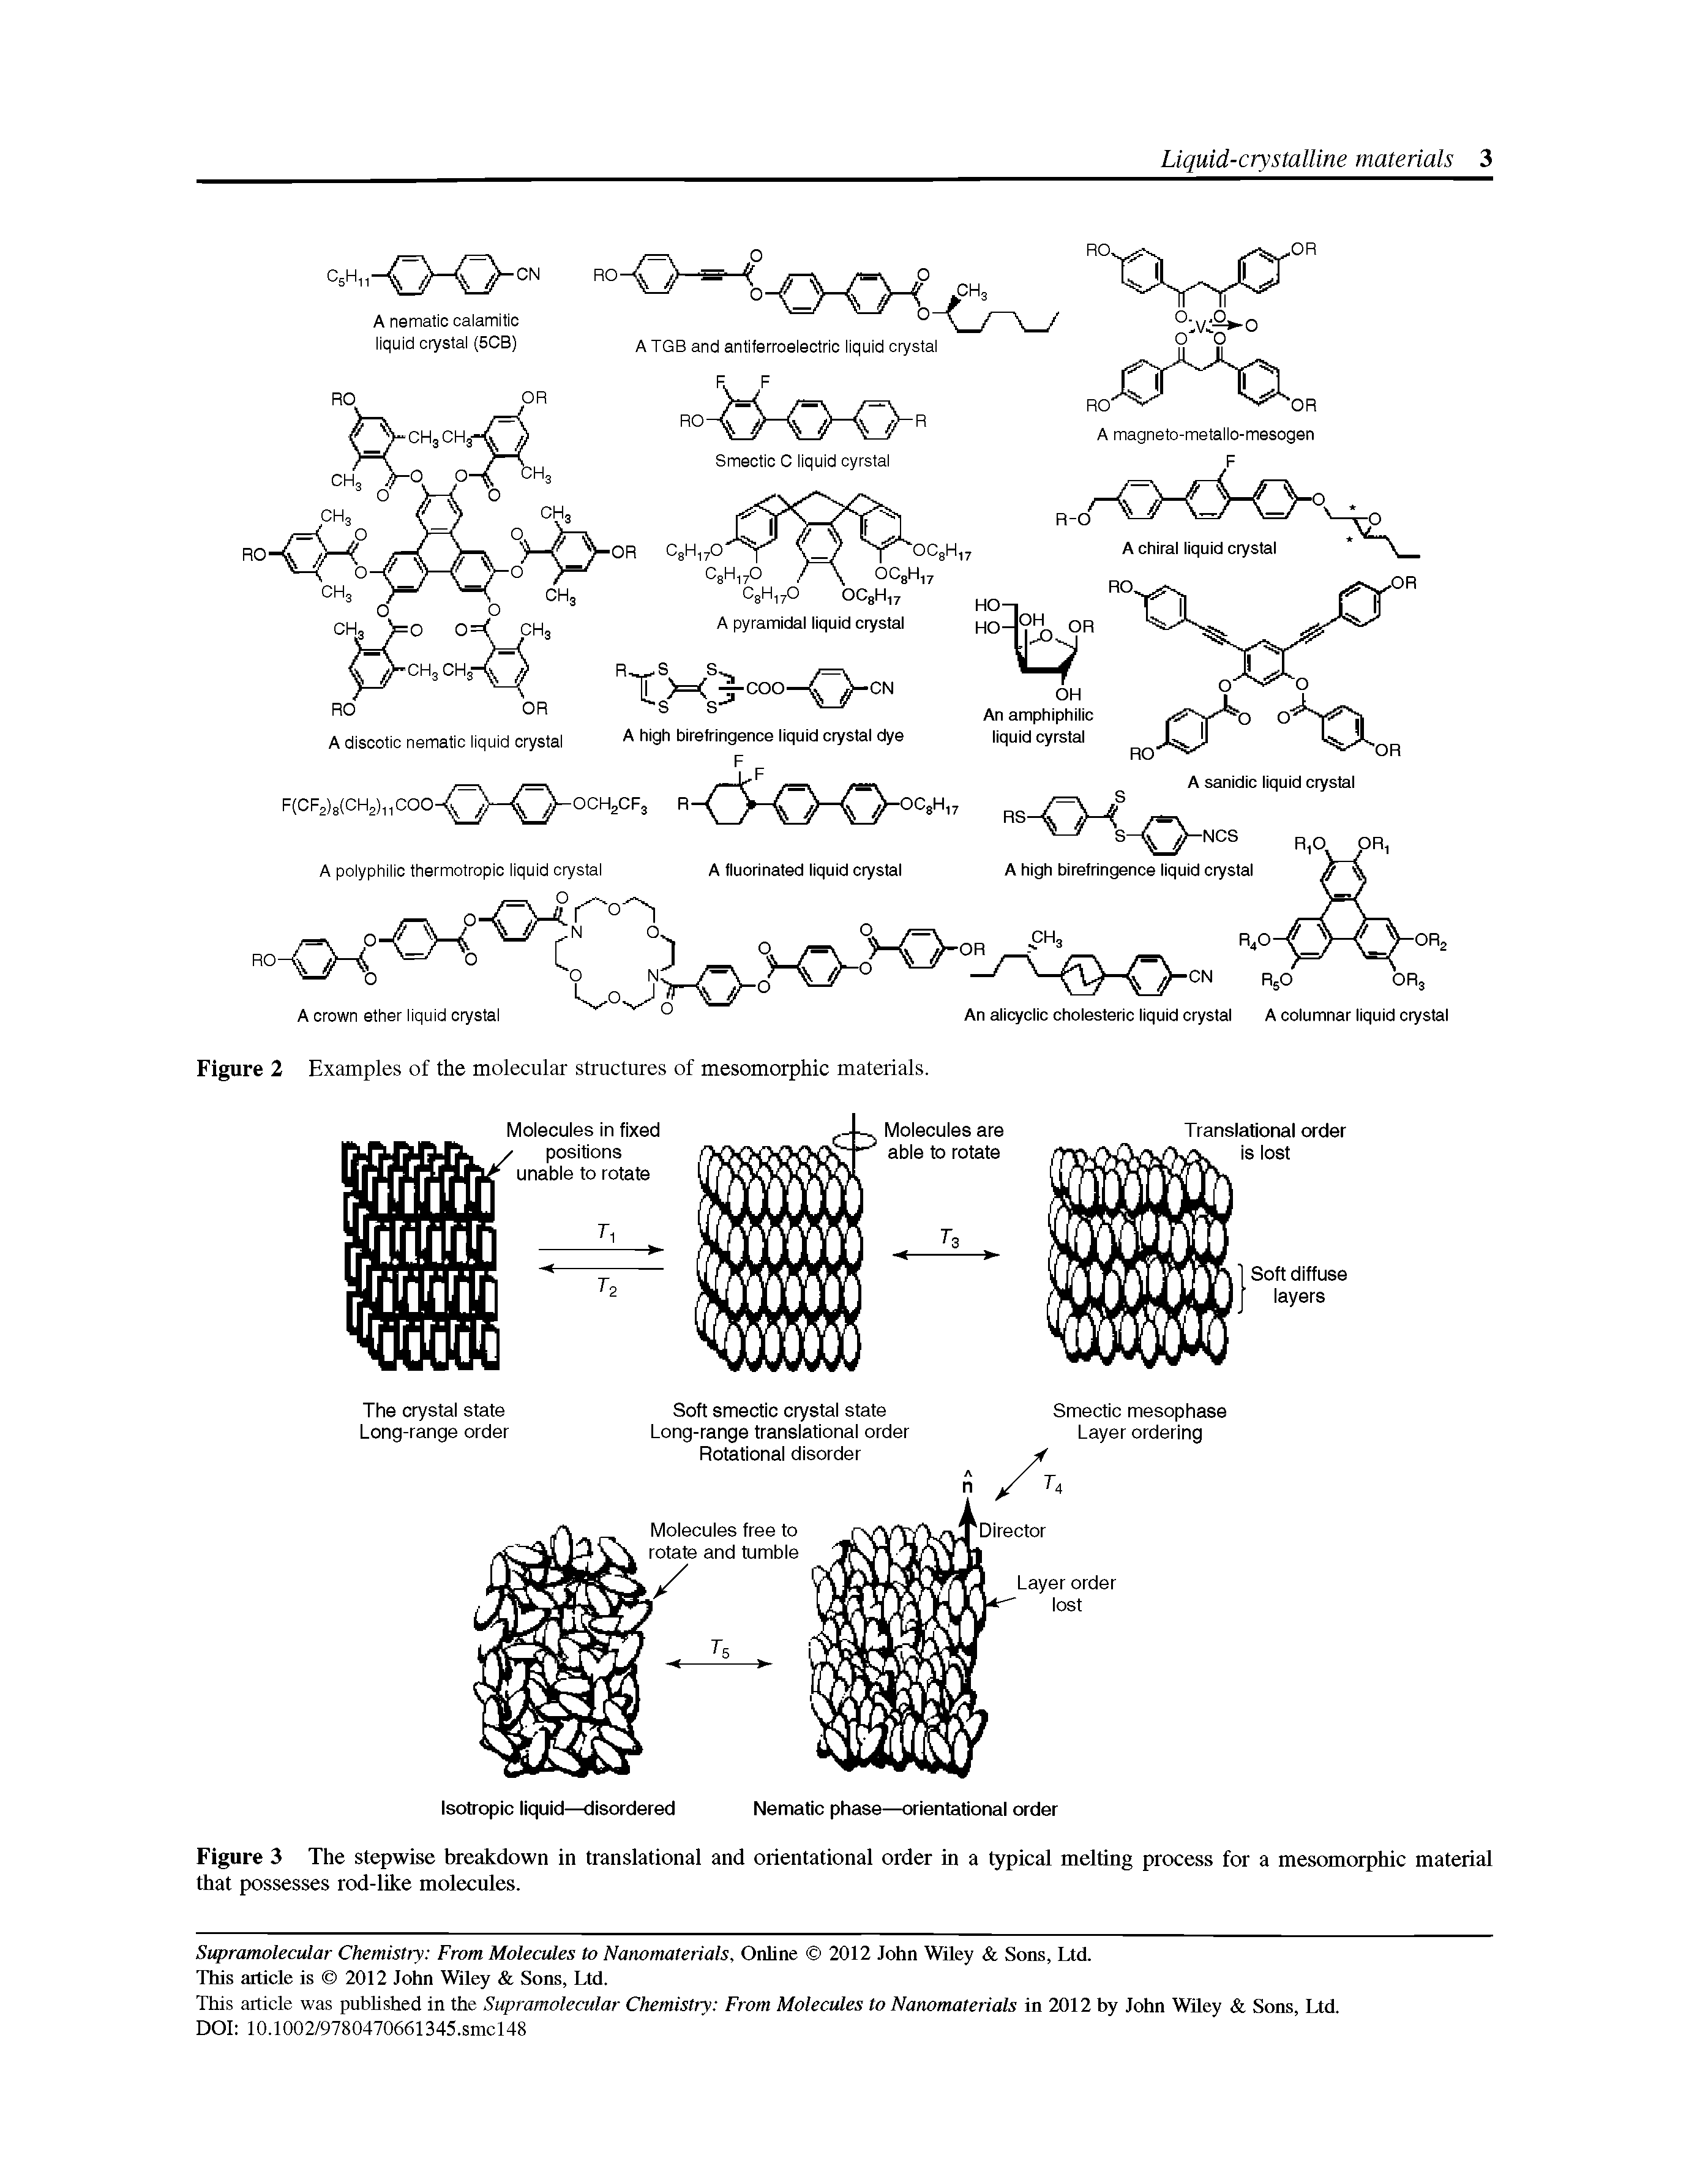 Figure 3 The stepwise breakdown in translational and orientational order in a typical melting process for a mesomorphic material that possesses rod-like molecules.